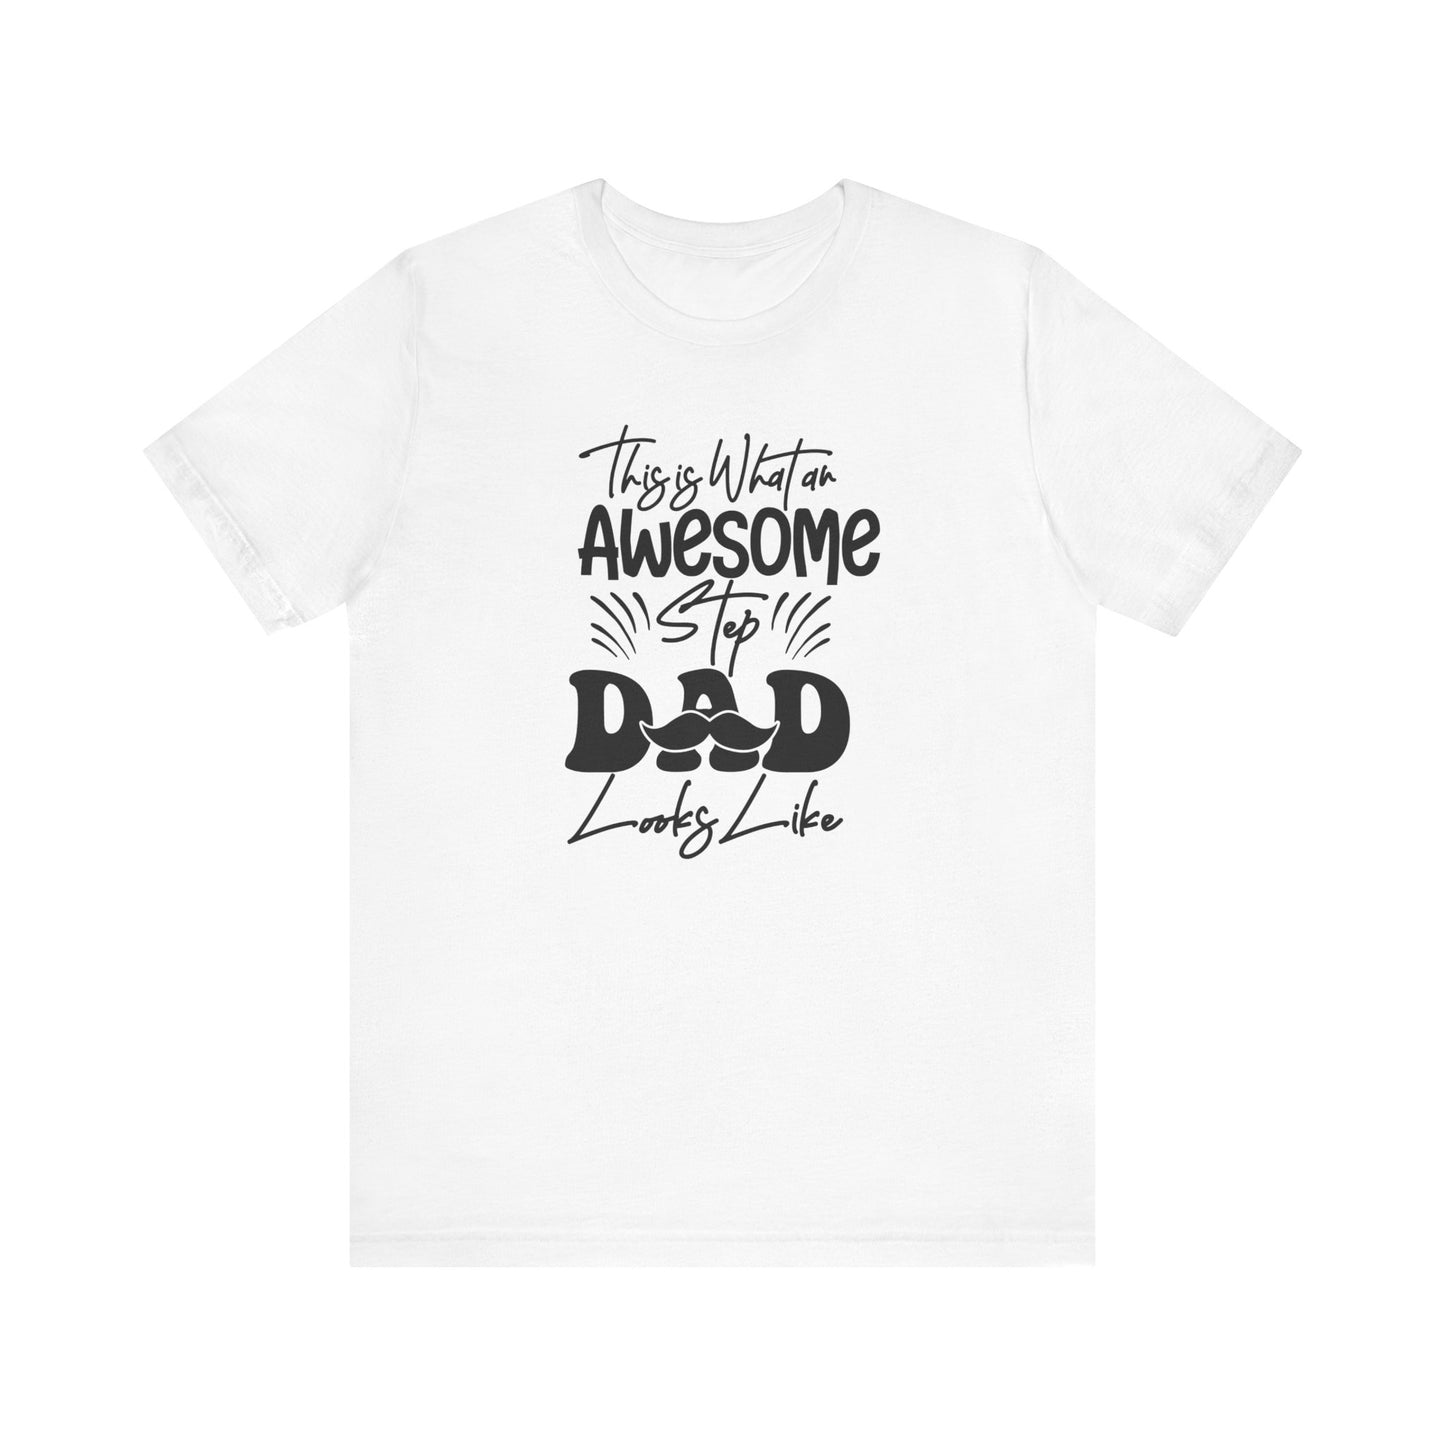 Awesome Step Dad T-Shirt For Cool Parent TShirt For Great Father's Day T Shirt Gift Idea